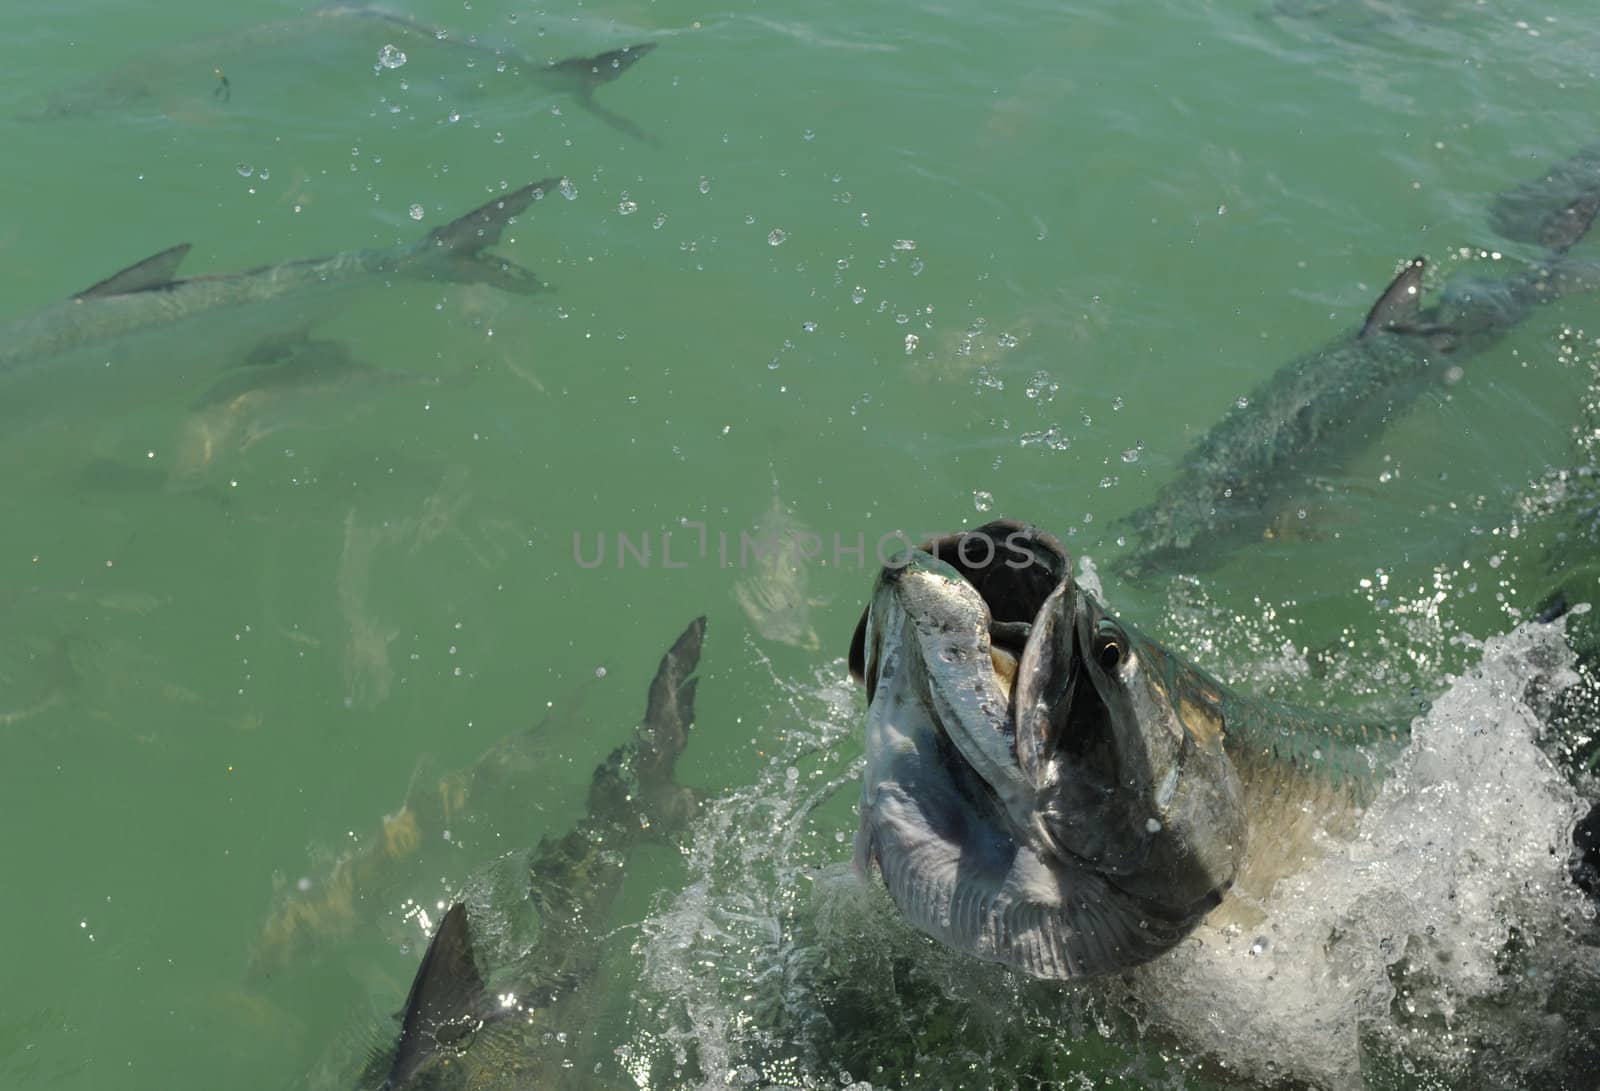 Tarpon fish jumping out of water with other tarpons swimming nearby in the Atlantic Ocean